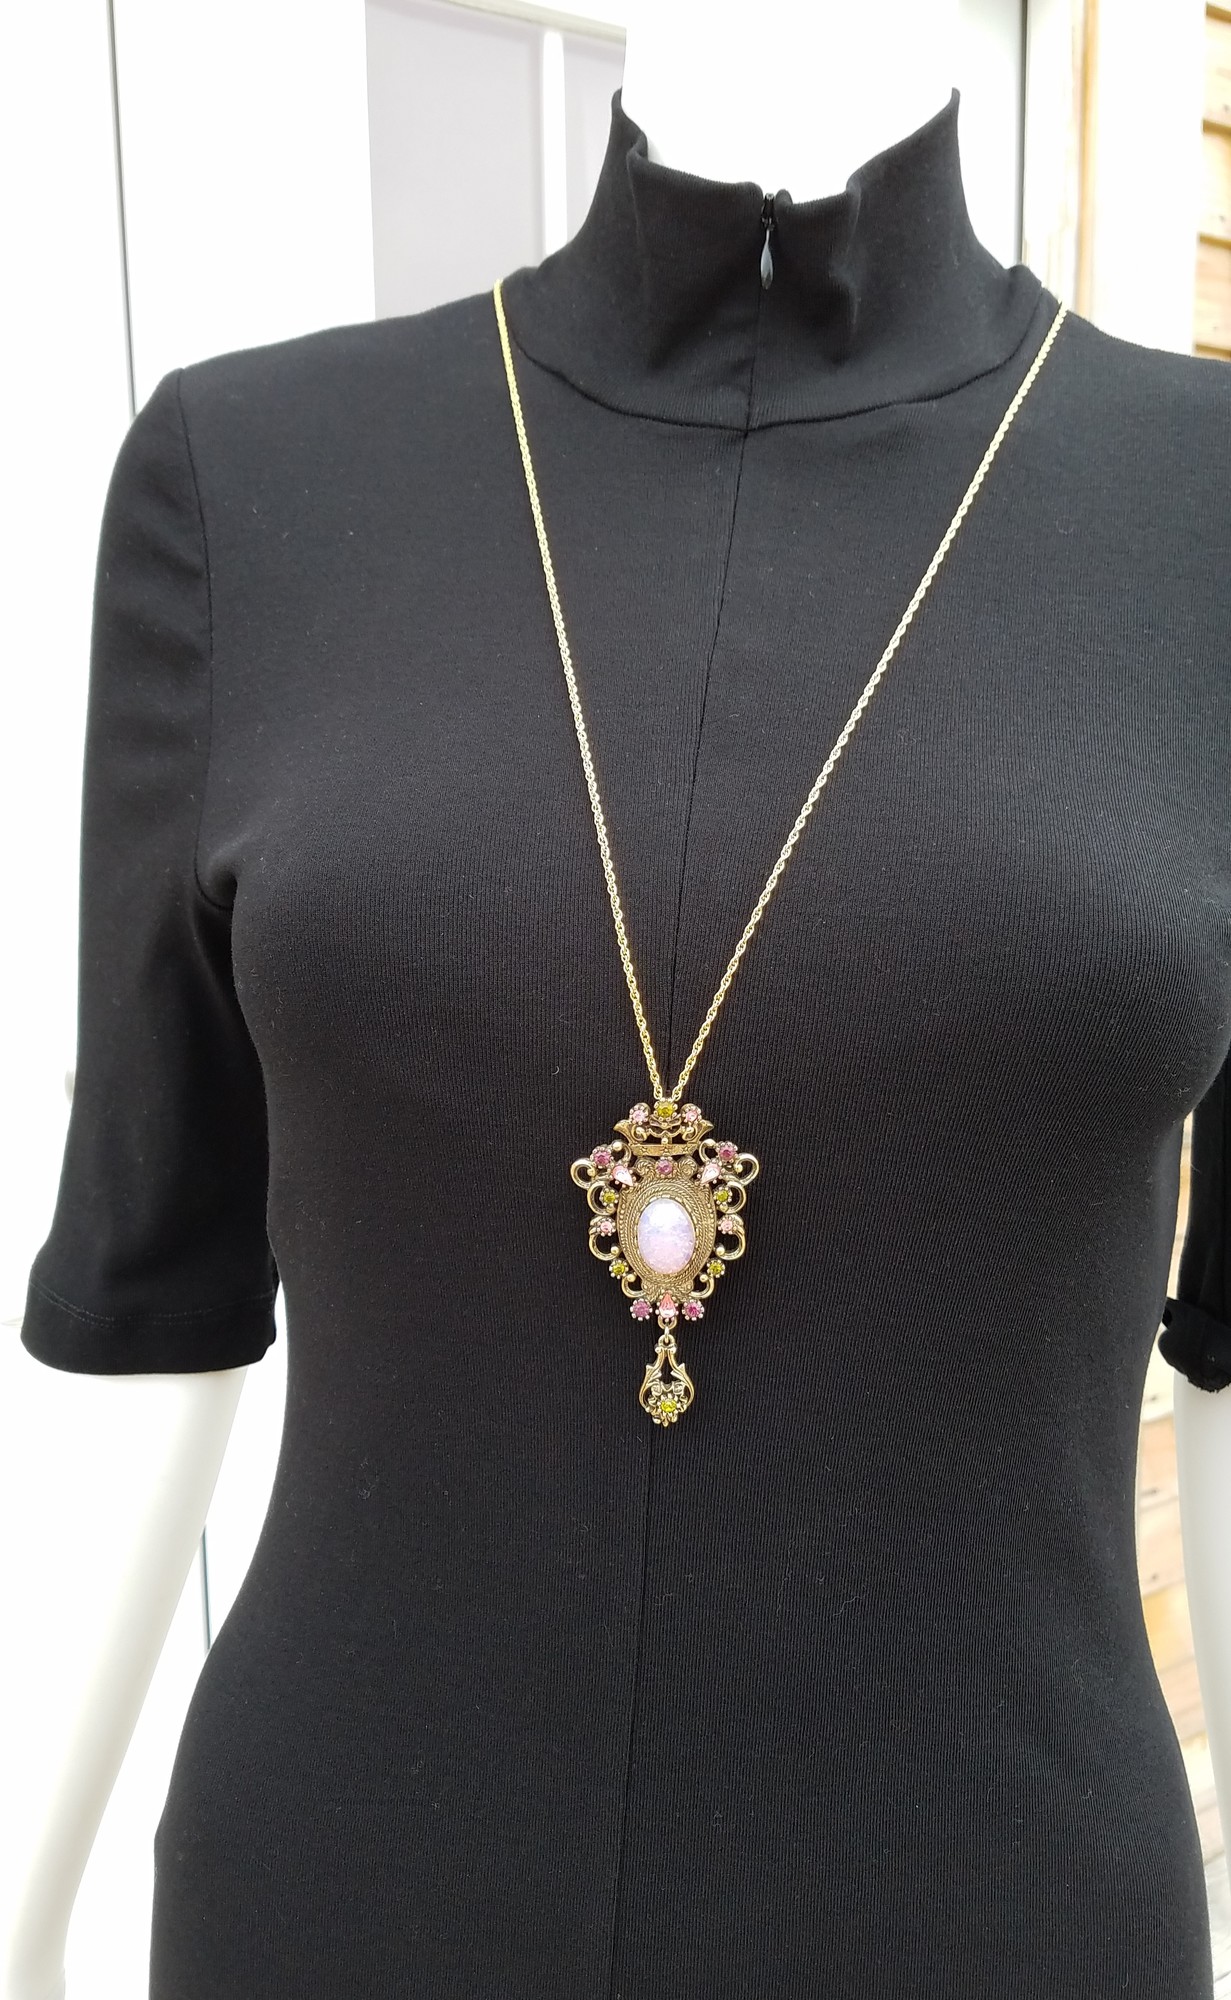 Vintage Sarah Coventry Gold Chain Necklace - Etsy Singapore